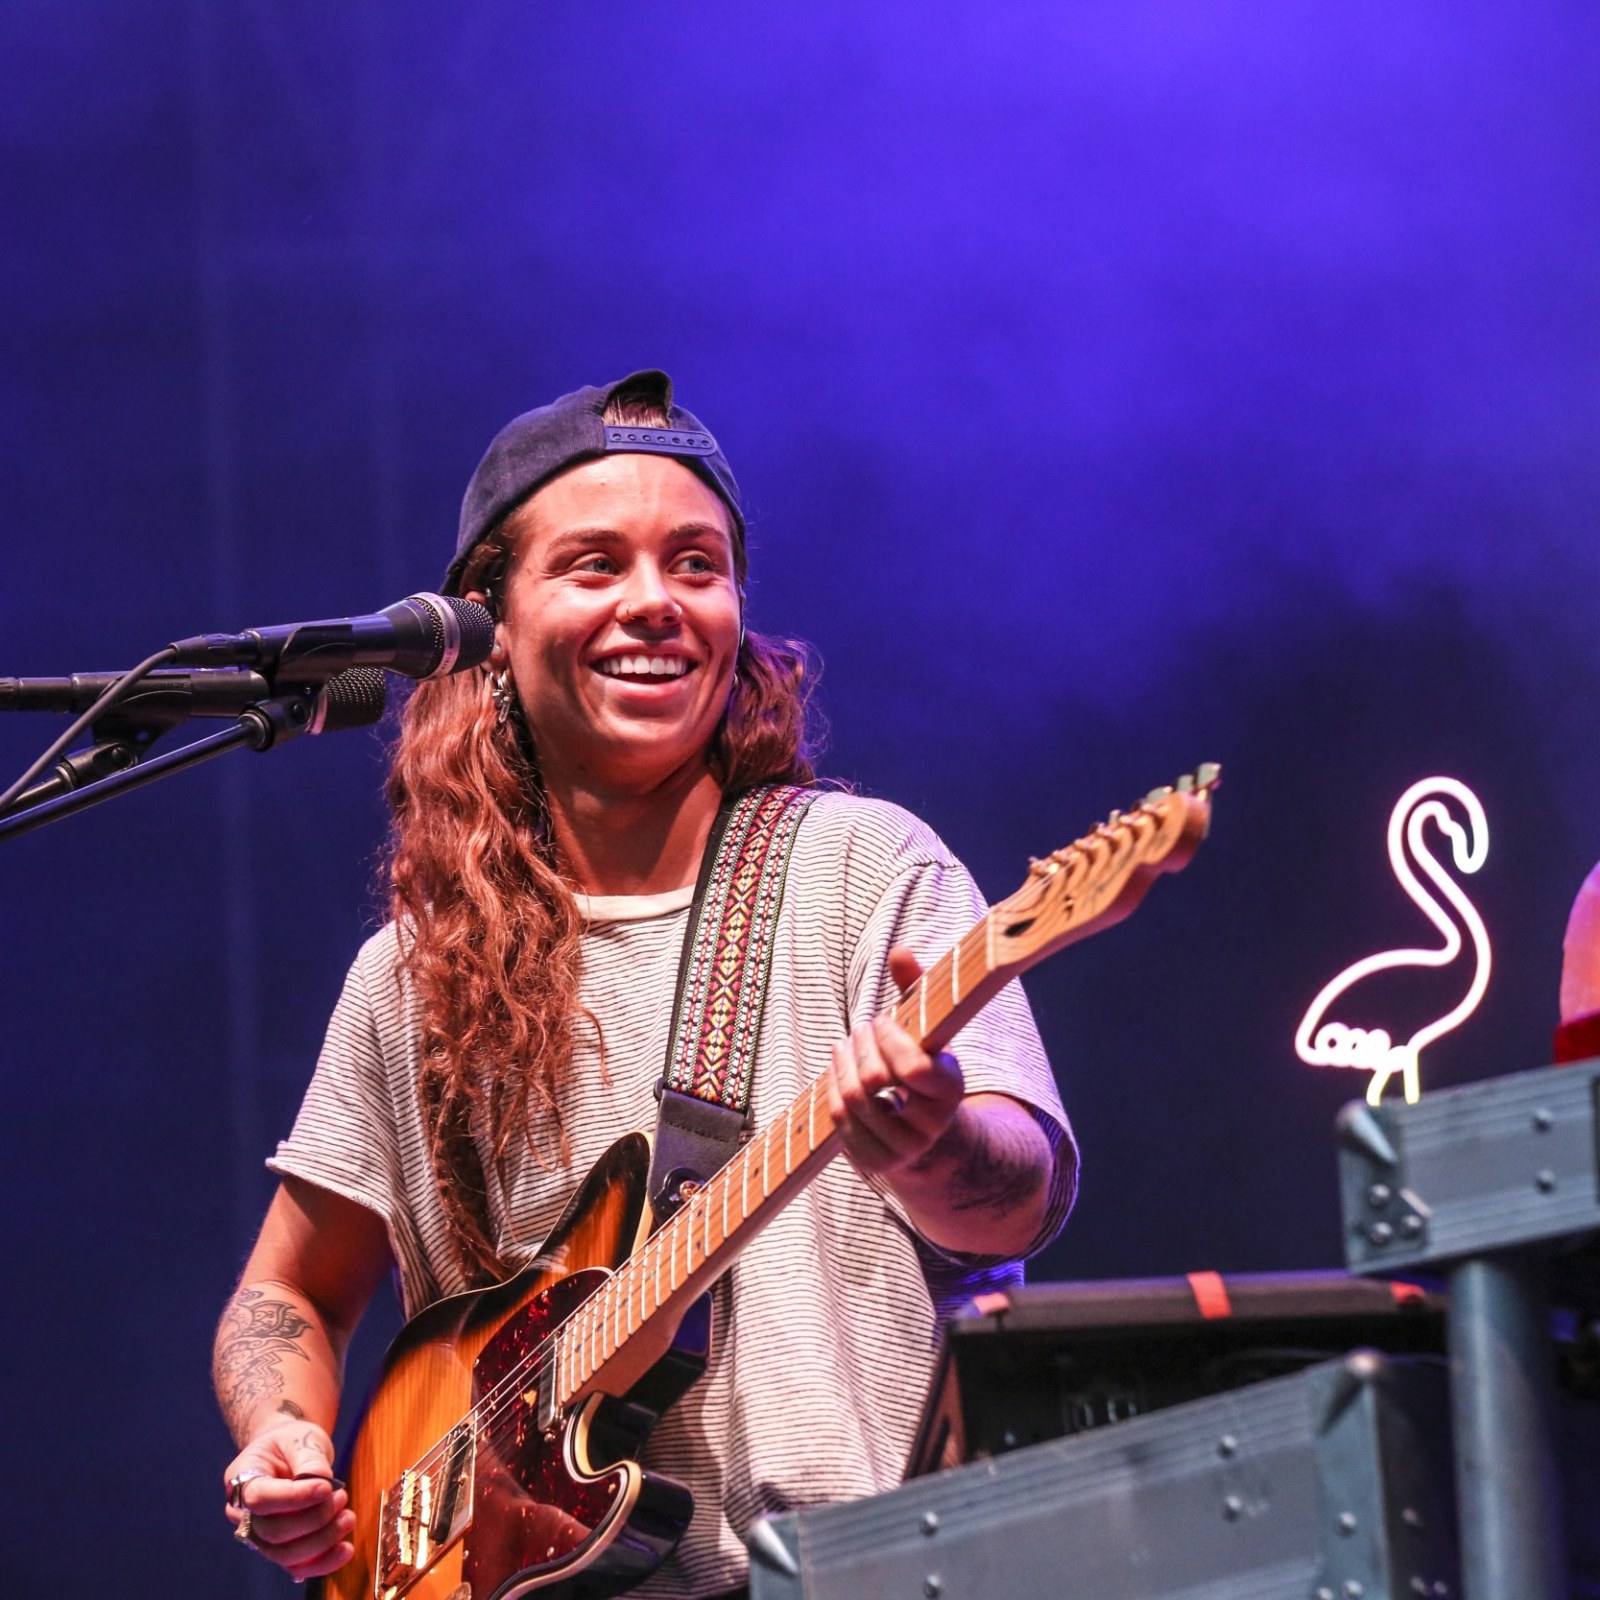 Tash Sultana enters flow state on Jungle, Tash Sultana on the flow  state she enters when she plays and creates music. Listen to her track  Jungle spoti.fi/RockThis, By Spotify